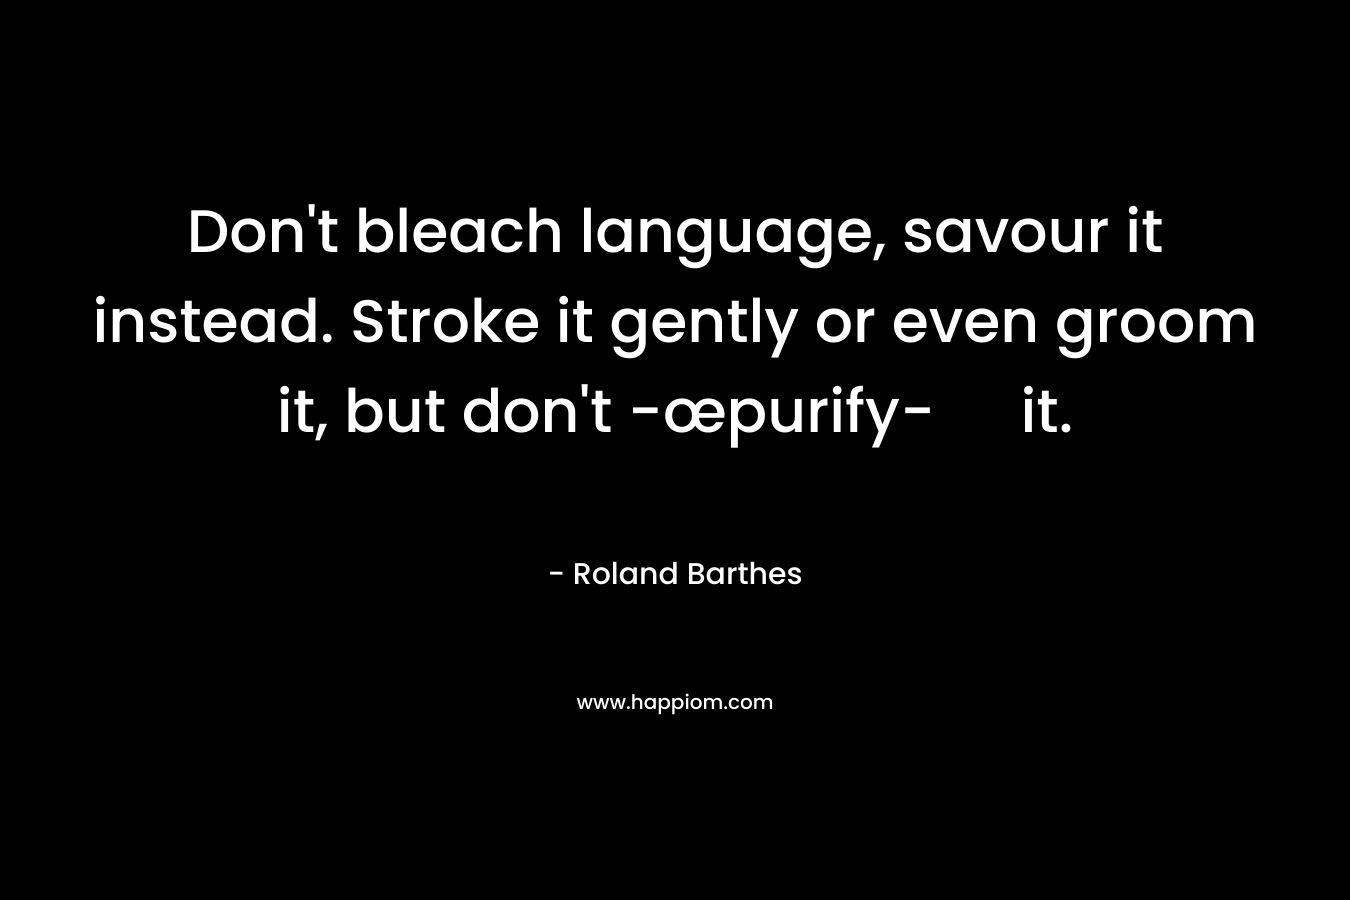 Don't bleach language, savour it instead. Stroke it gently or even groom it, but don't -œpurify- it.